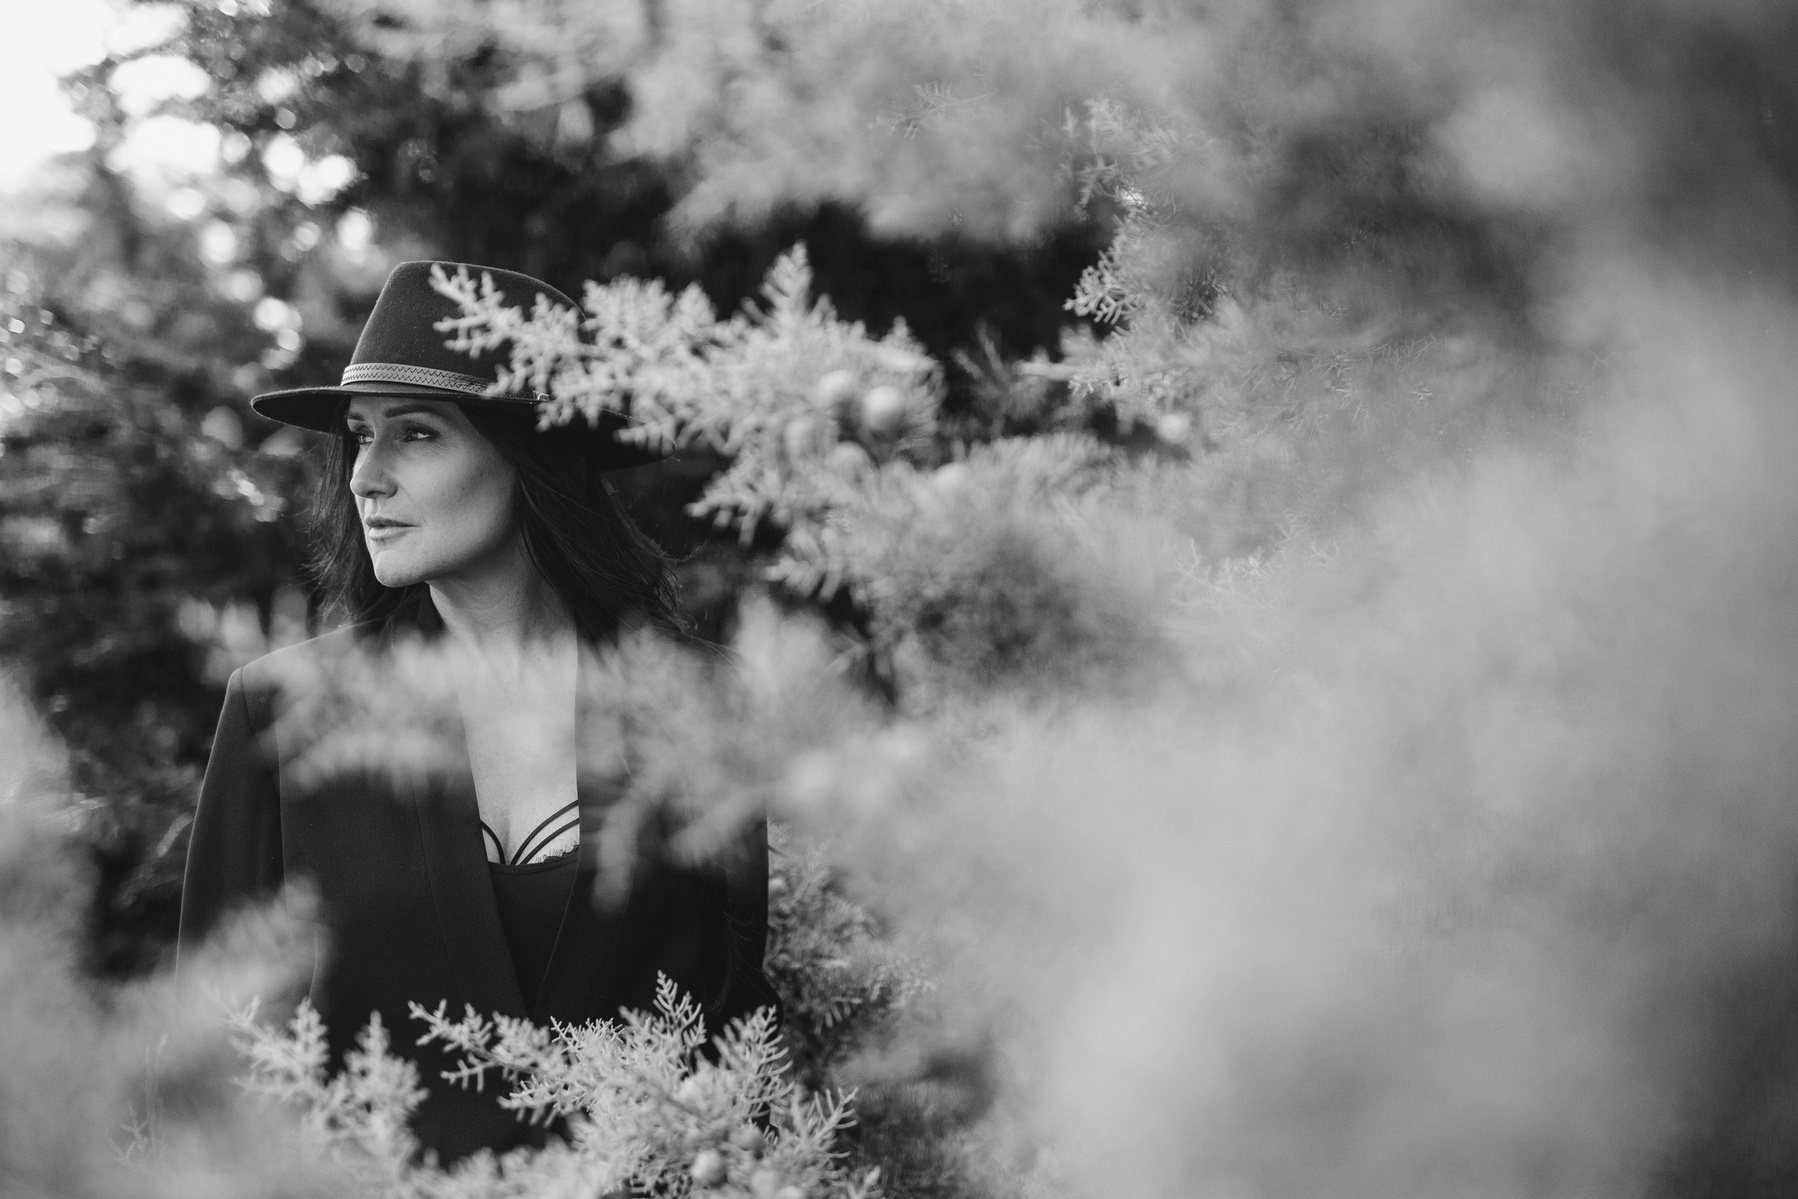 A glamourous brunette wears a black hat, she is framed by the branches of frosty pine trees